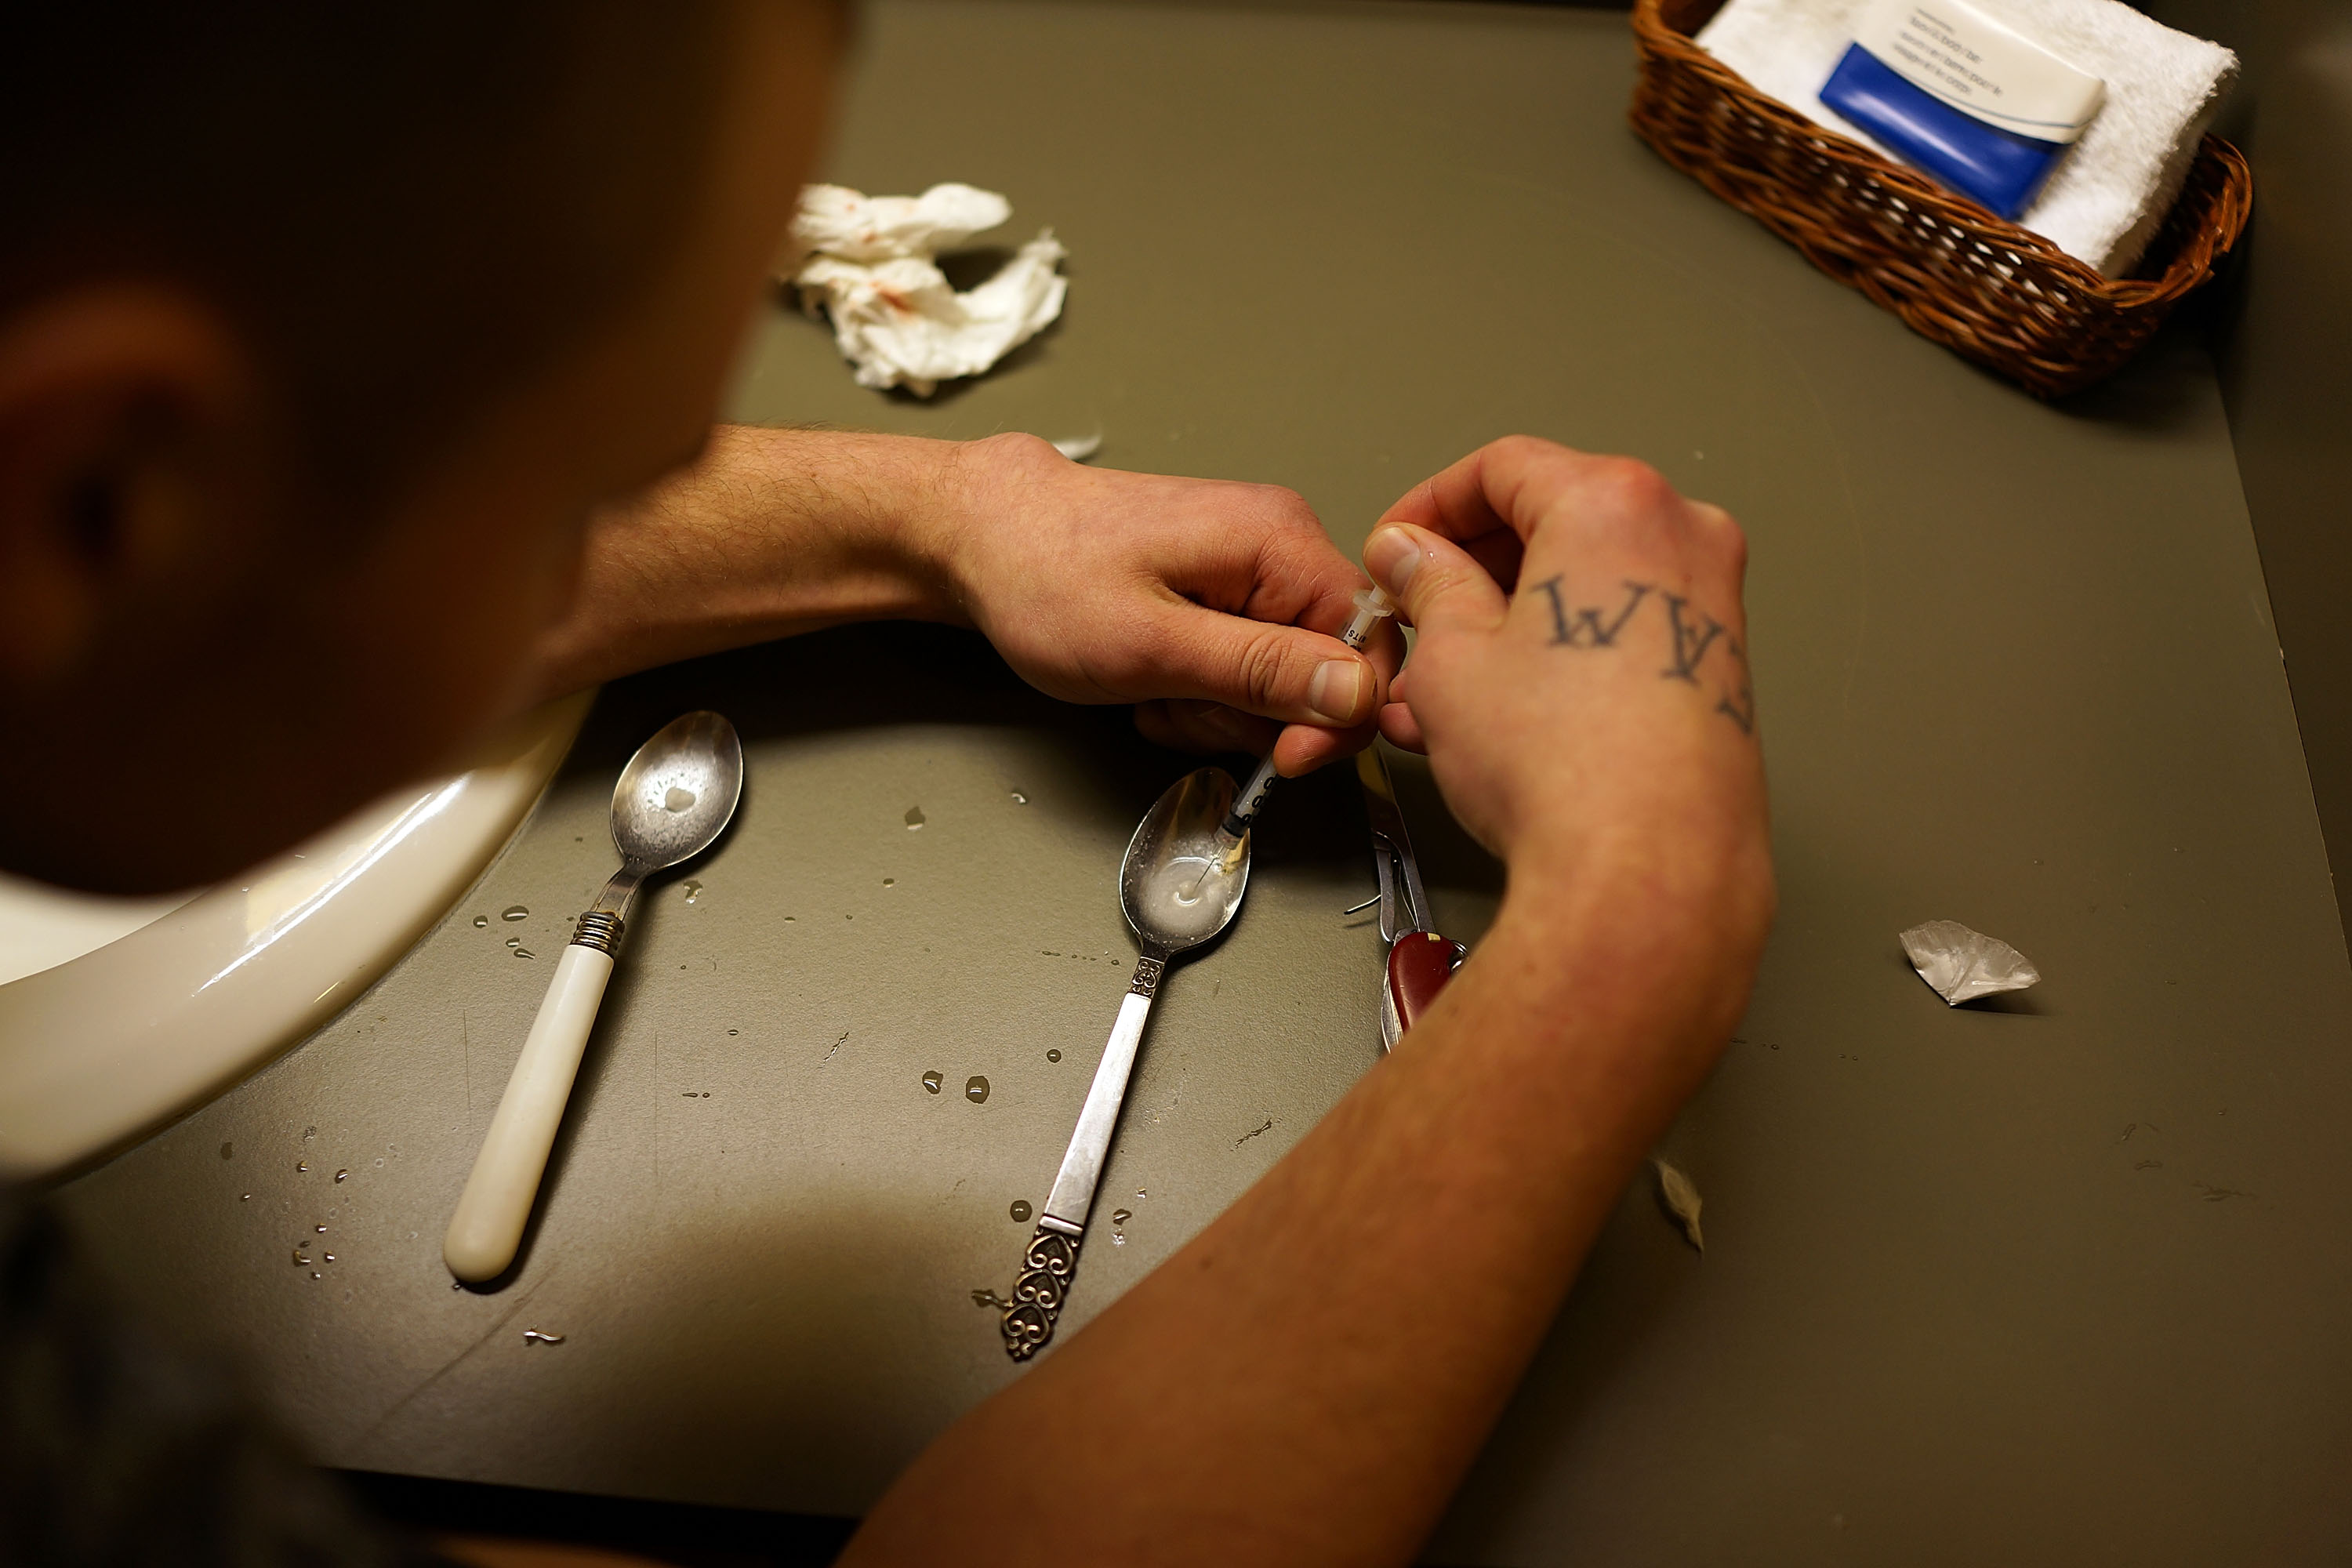 Drugs are prepared to shoot intravenously by a user addicted to heroin on February 6, 2014 in St. Johnsbury Vermont. (Spencer Platt&mdash;Getty Images)